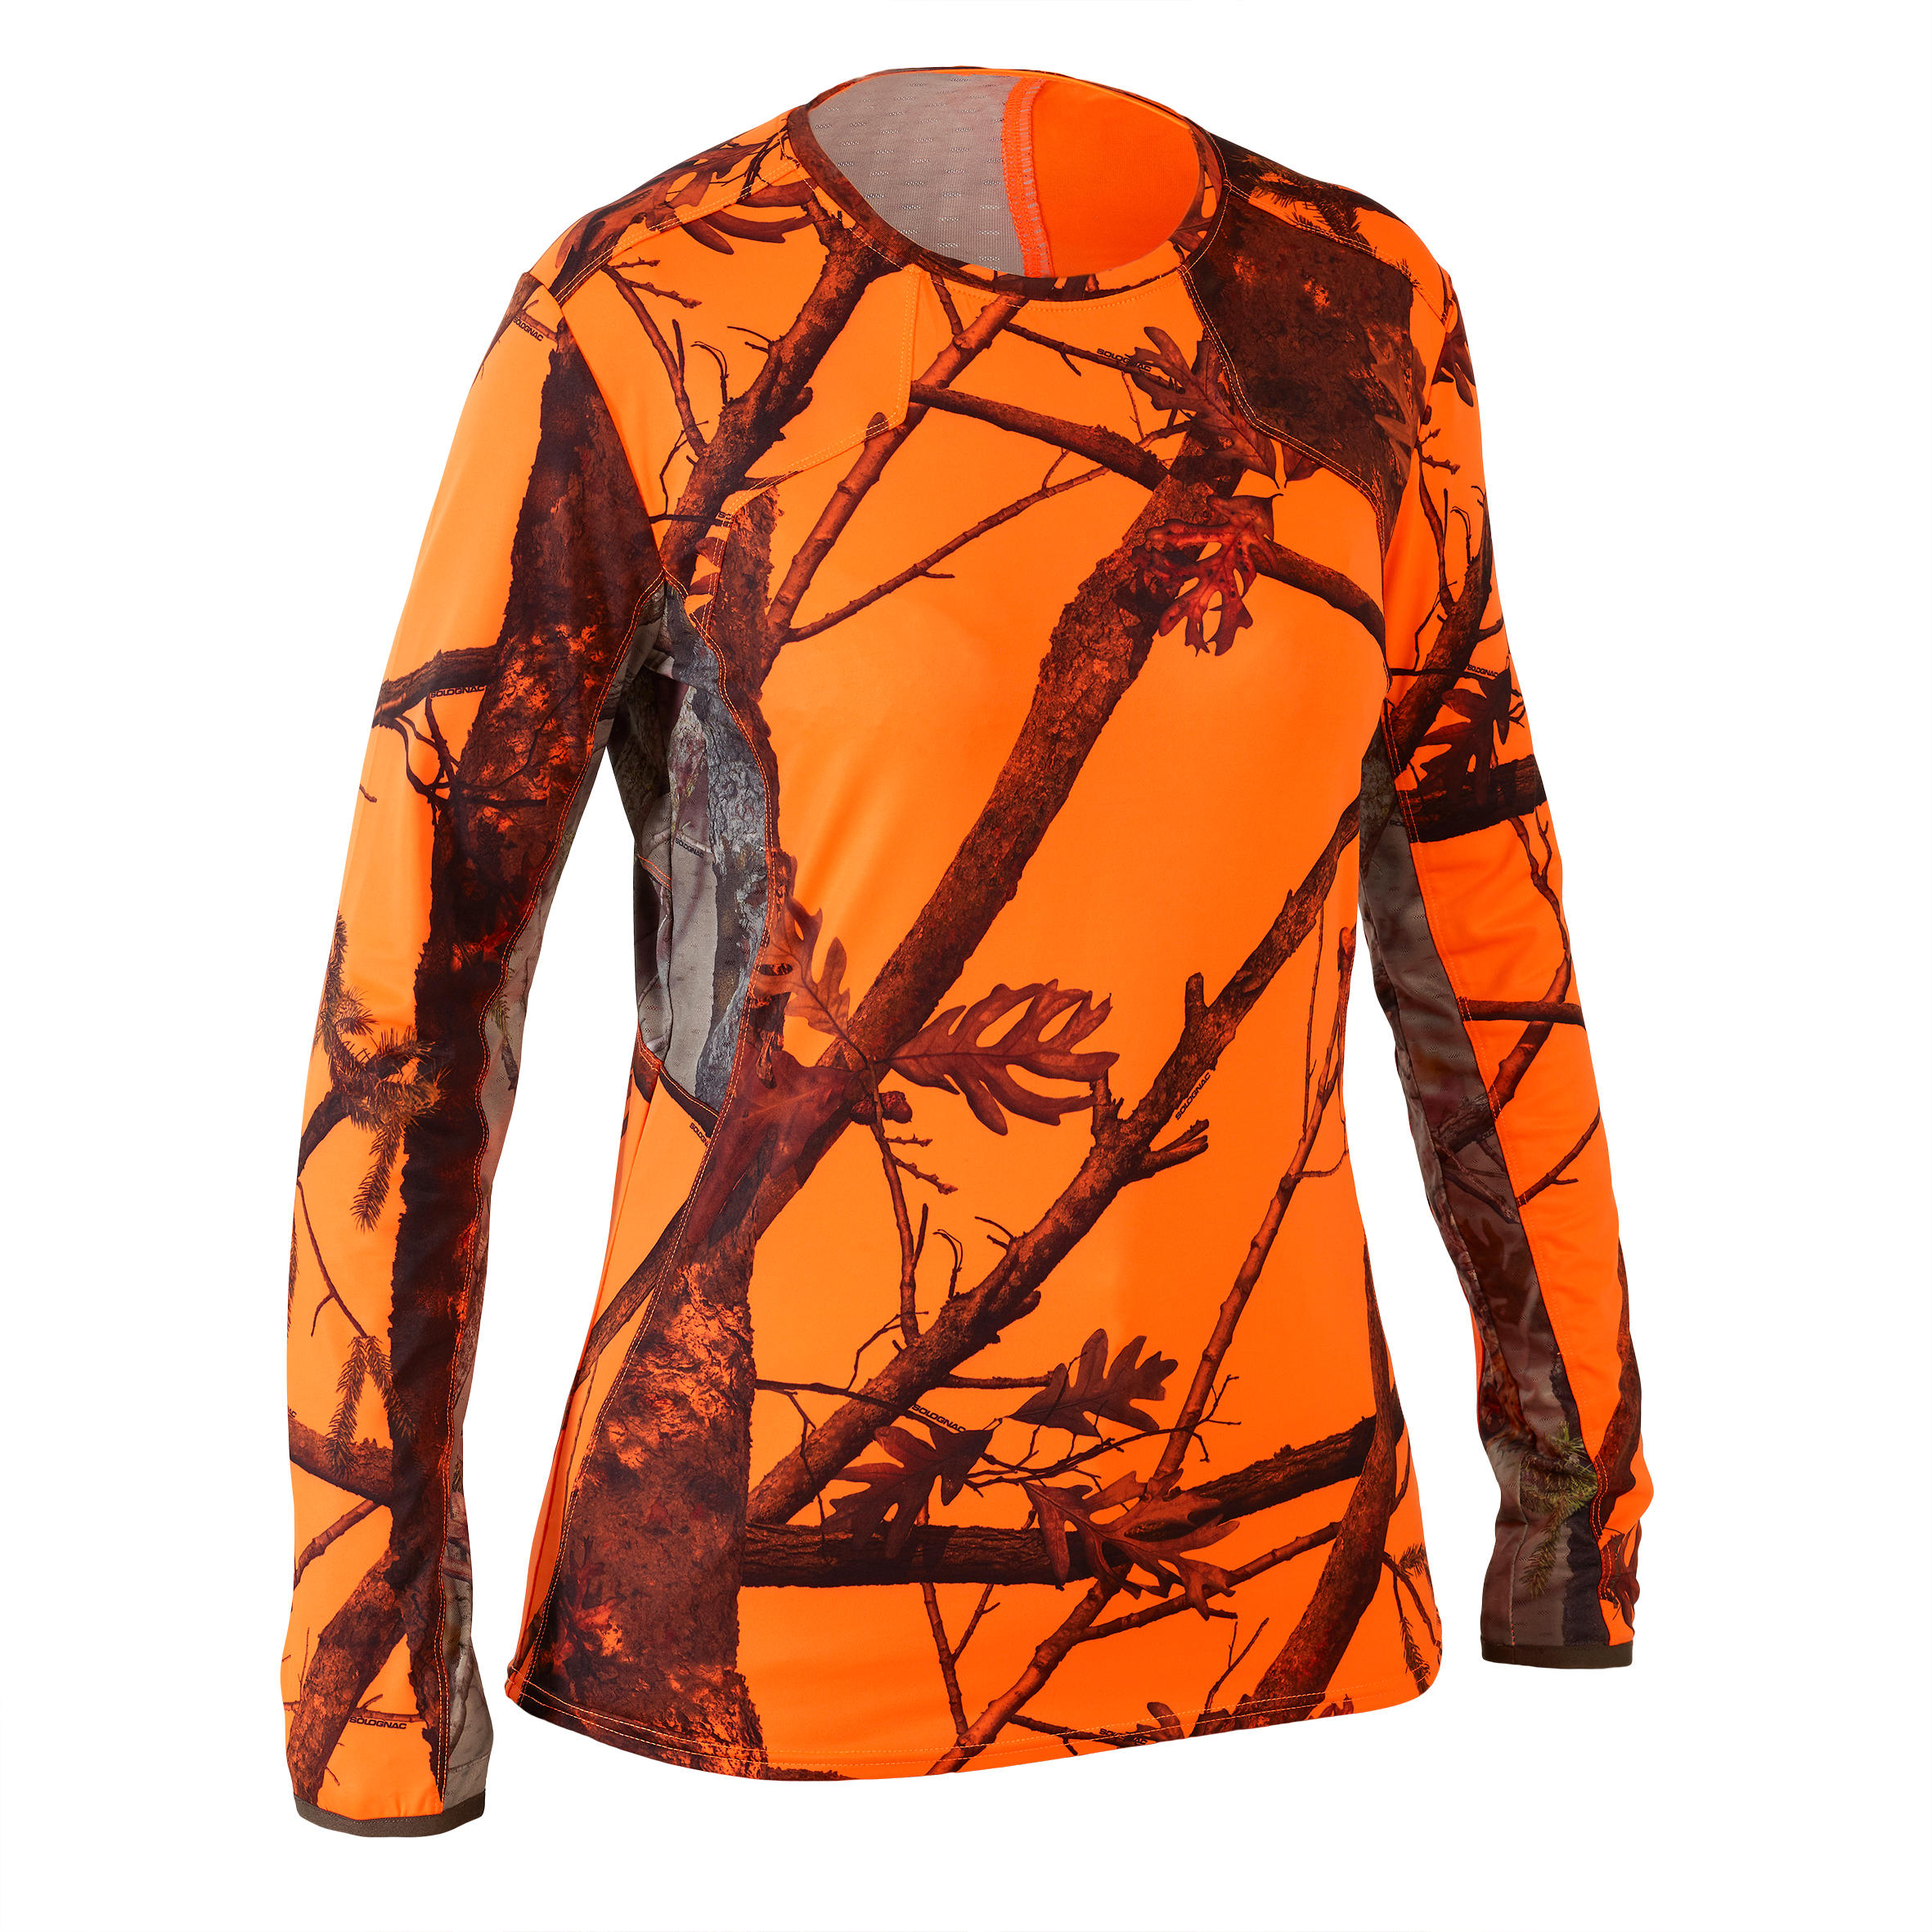 Women’s Long-sleeved Silent Breathable Hunting T-shirt 500 - Neon Camouflage